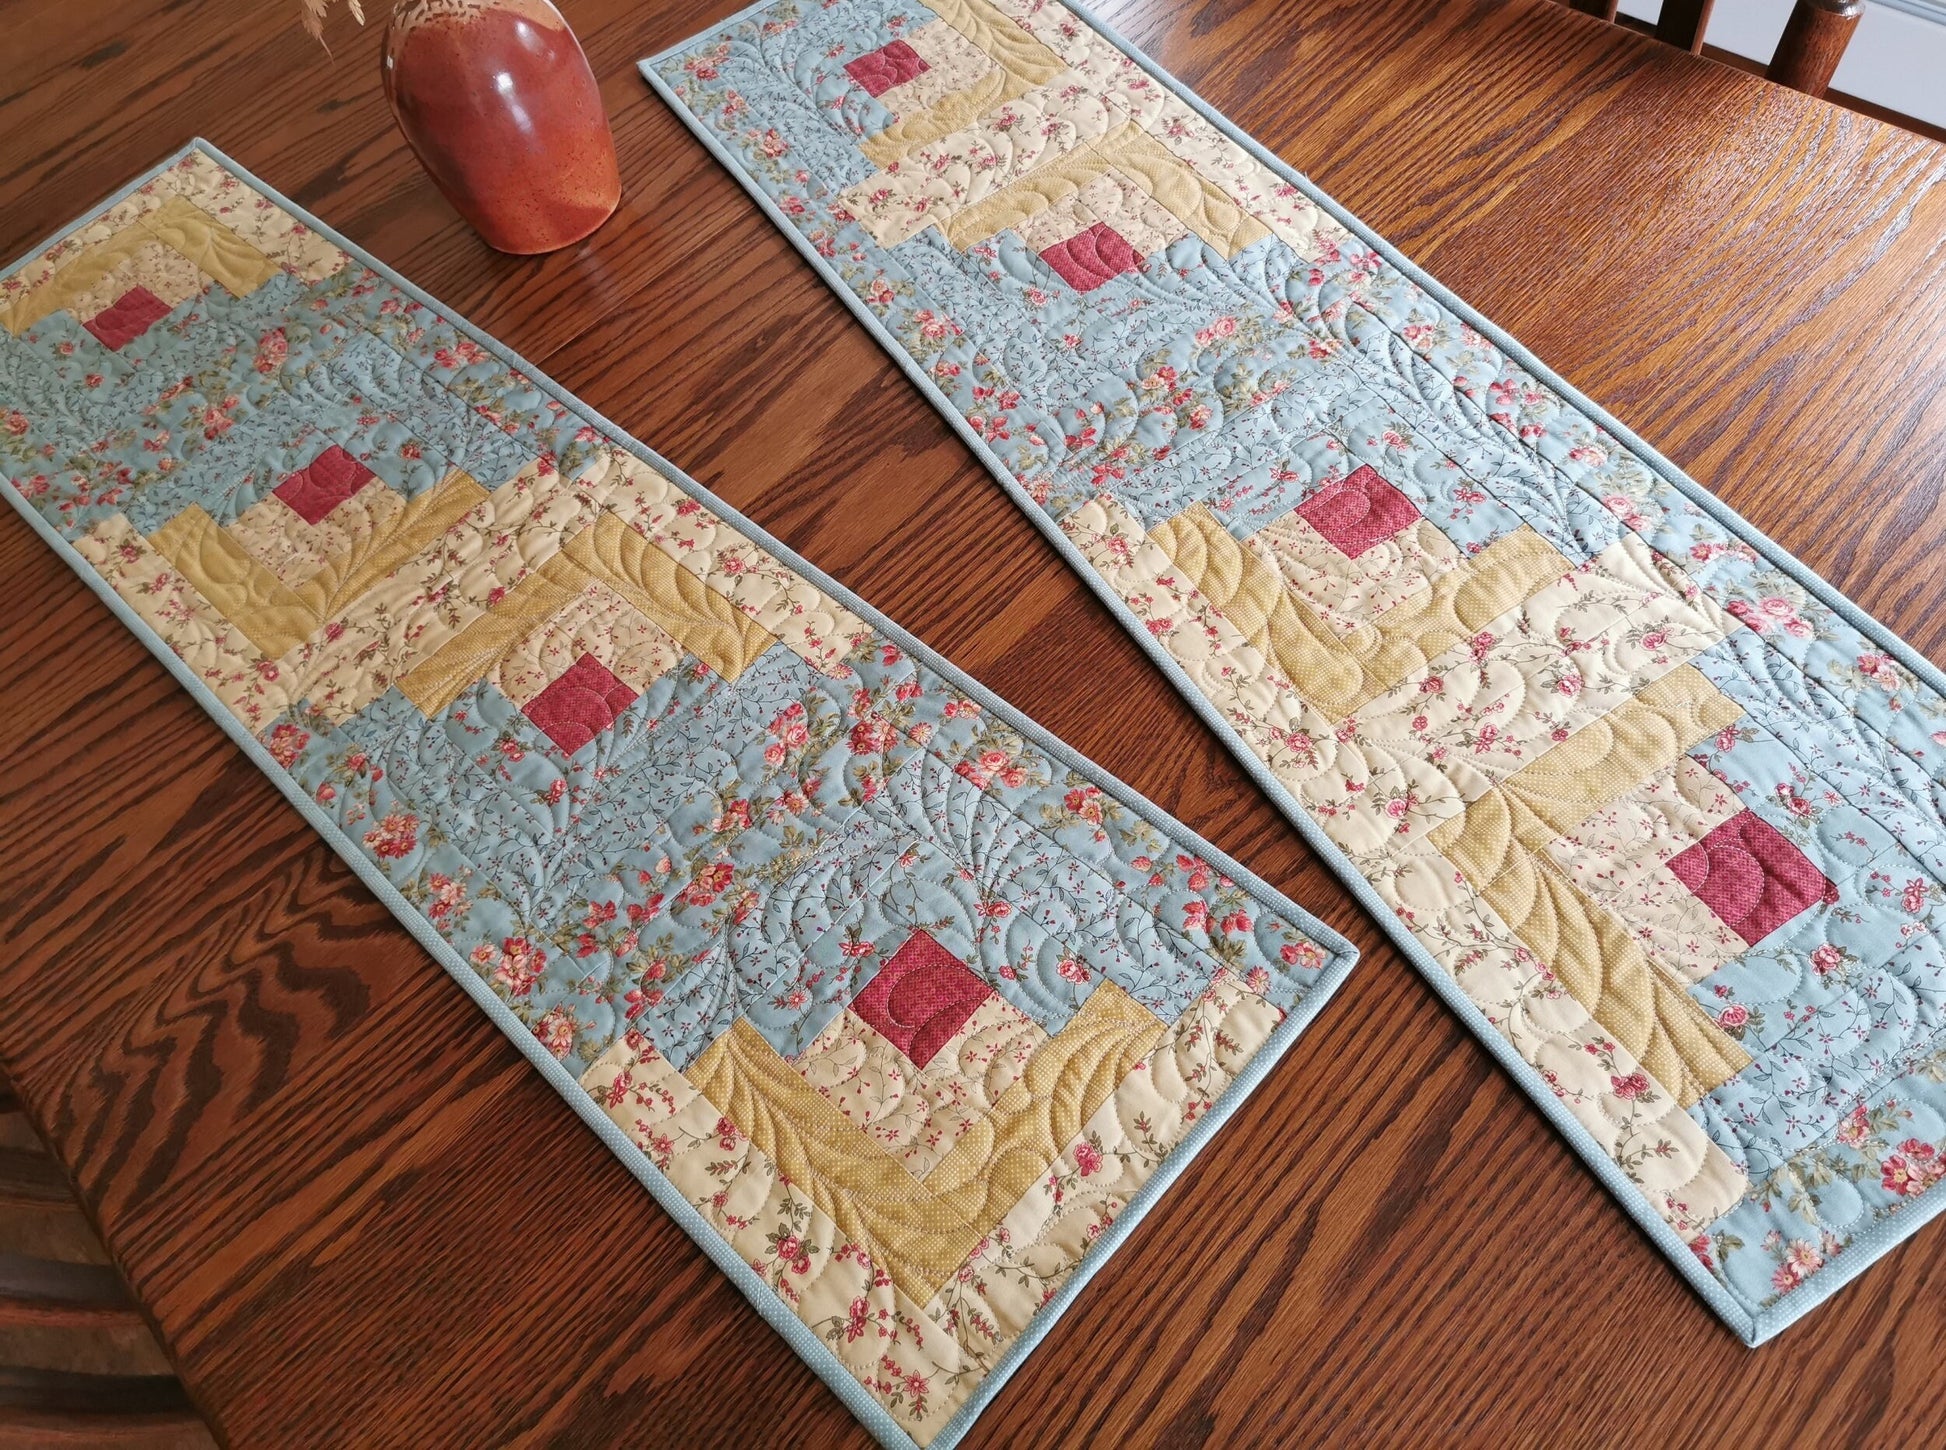 two coordinating log cabin table runners